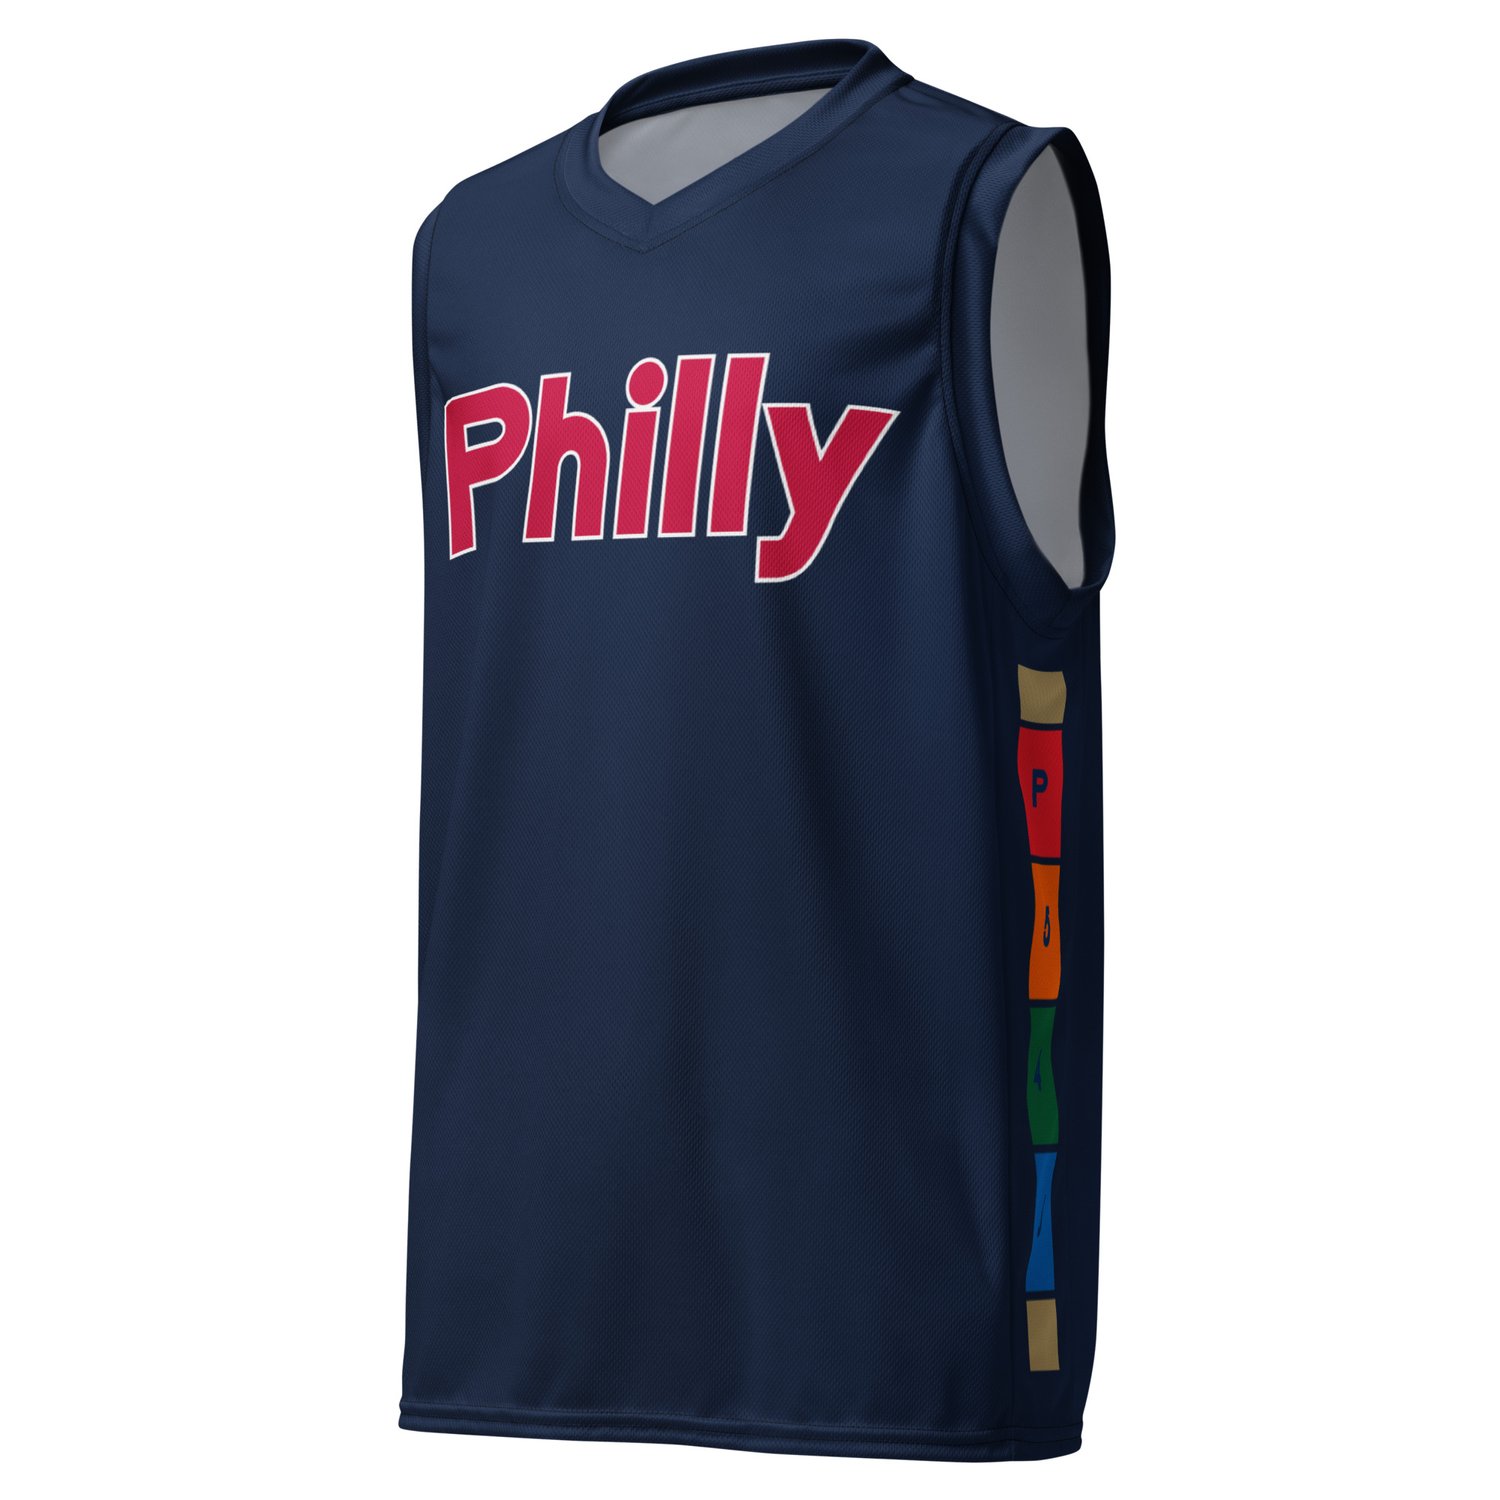 The Side Jawn Philly 545 City Edition Jersey